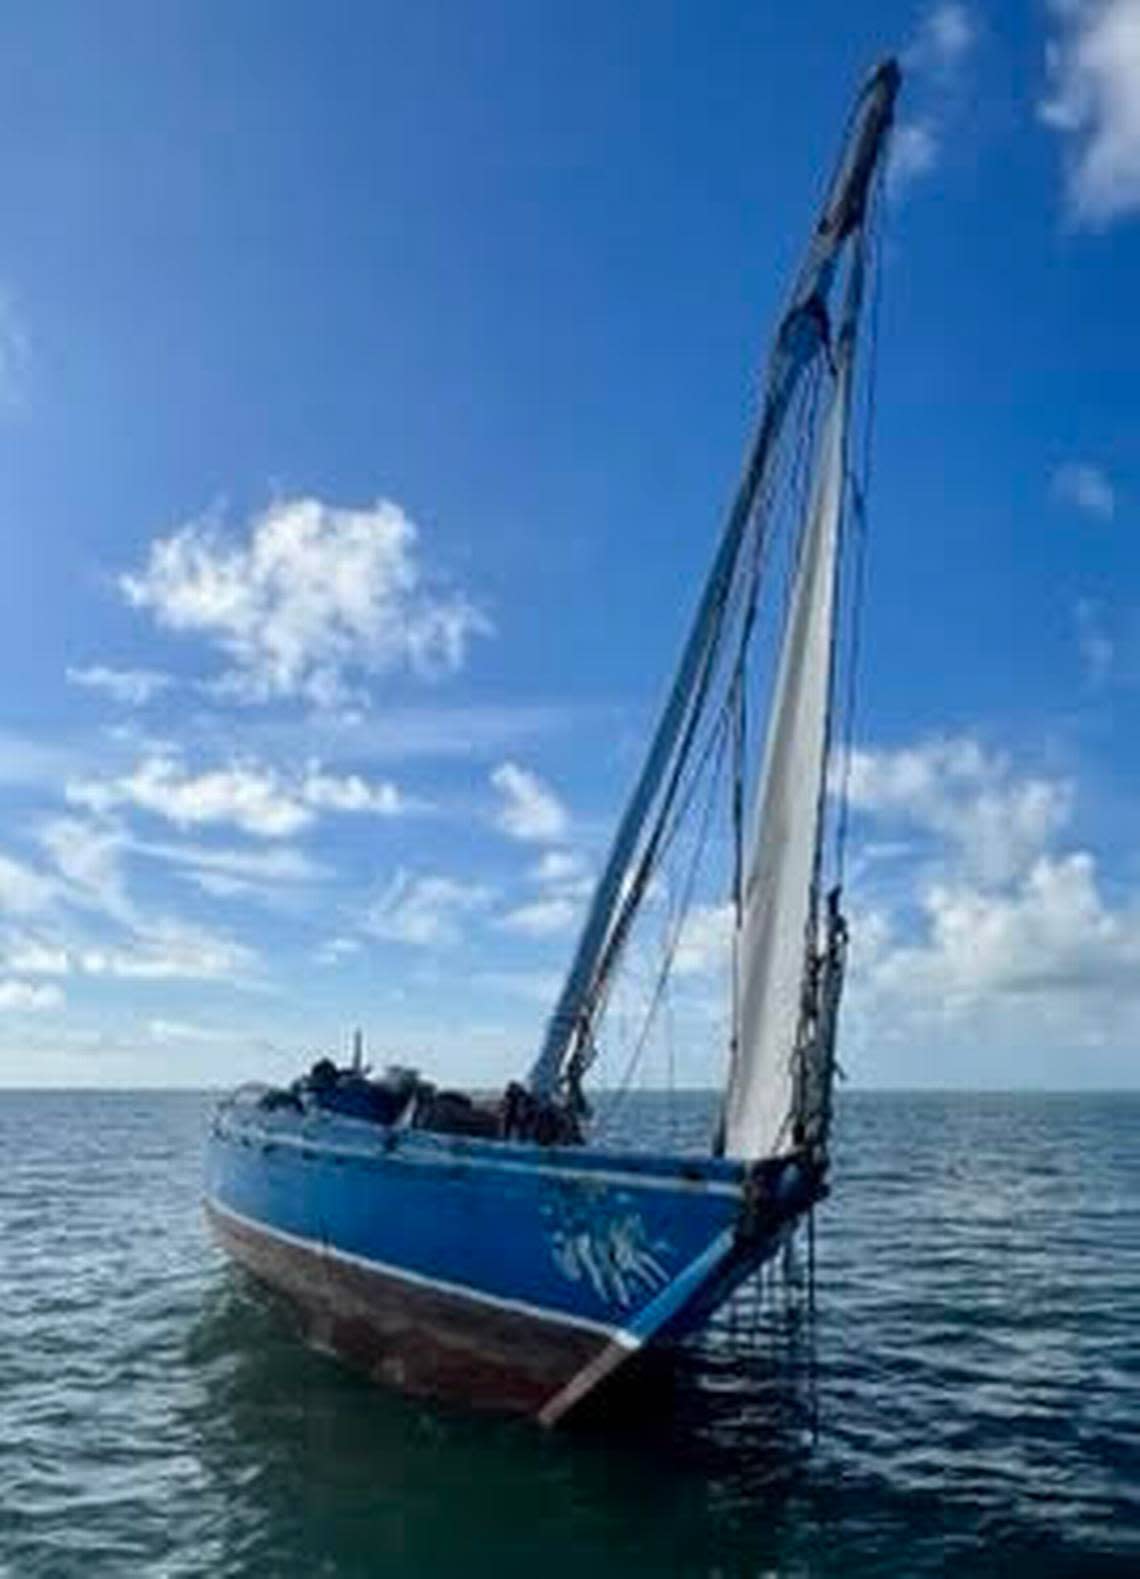 A Haitian migrant sailboat is beached on a sandbar off Windley Key on Tuesday, Nov. 22, 2022. Roughly 200 people reached the Keys on the boat the day before. A man’s body was found in the same area three days later. Authorities are investigating if he was among the group of migrants.